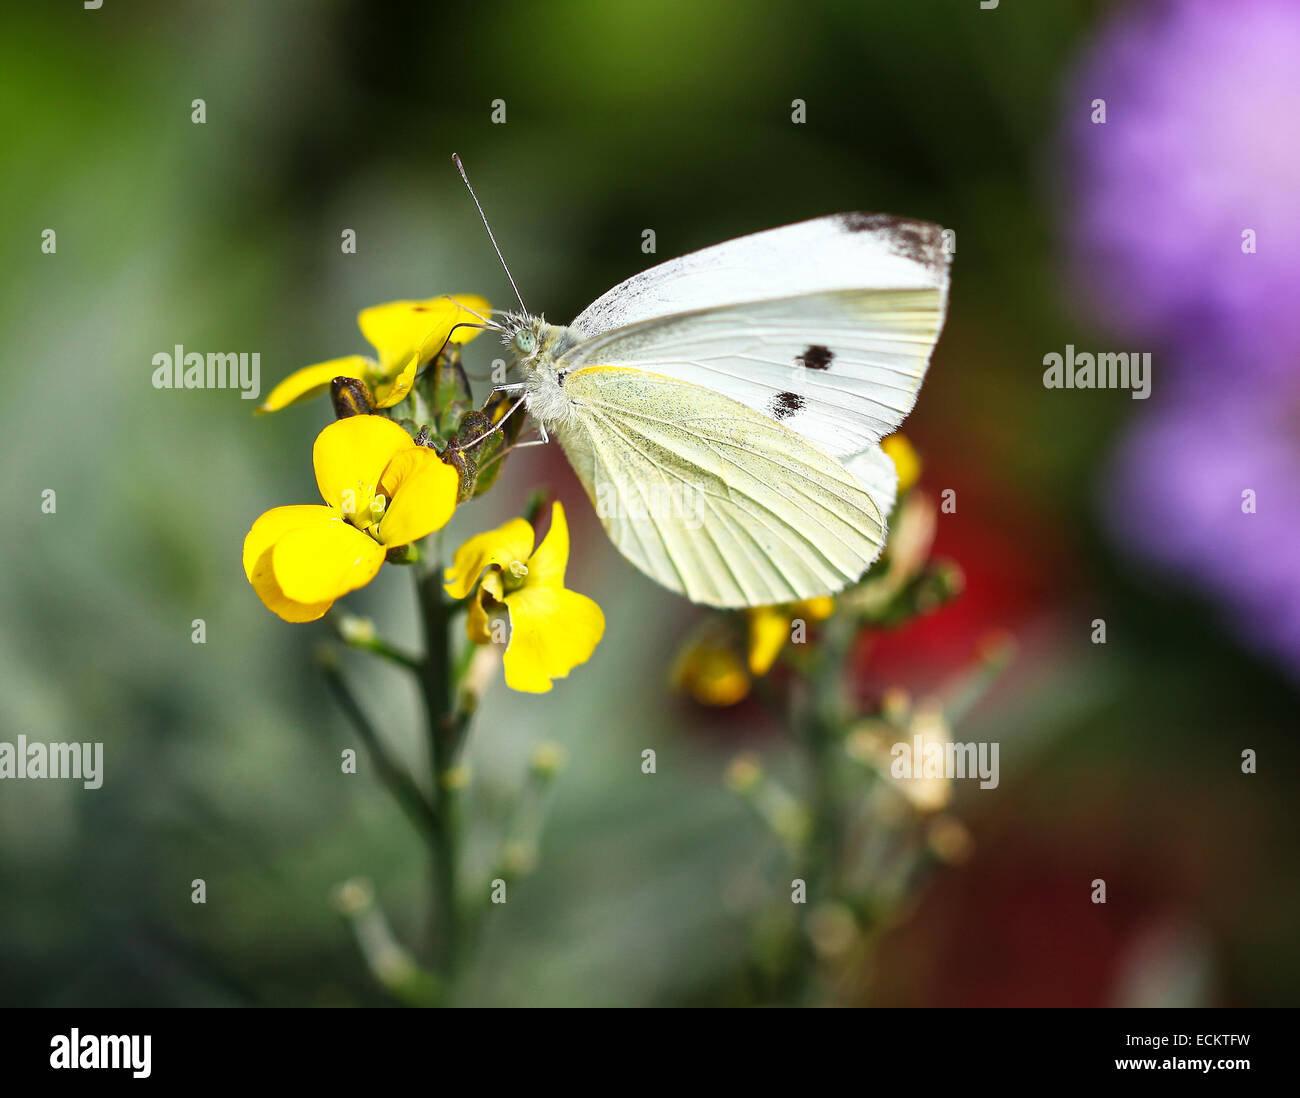 A close up or macro shot of a Small White butterfly (Pieris rapae) on a yellow wallflower (Erysimum) flower, England, UK Stock Photo